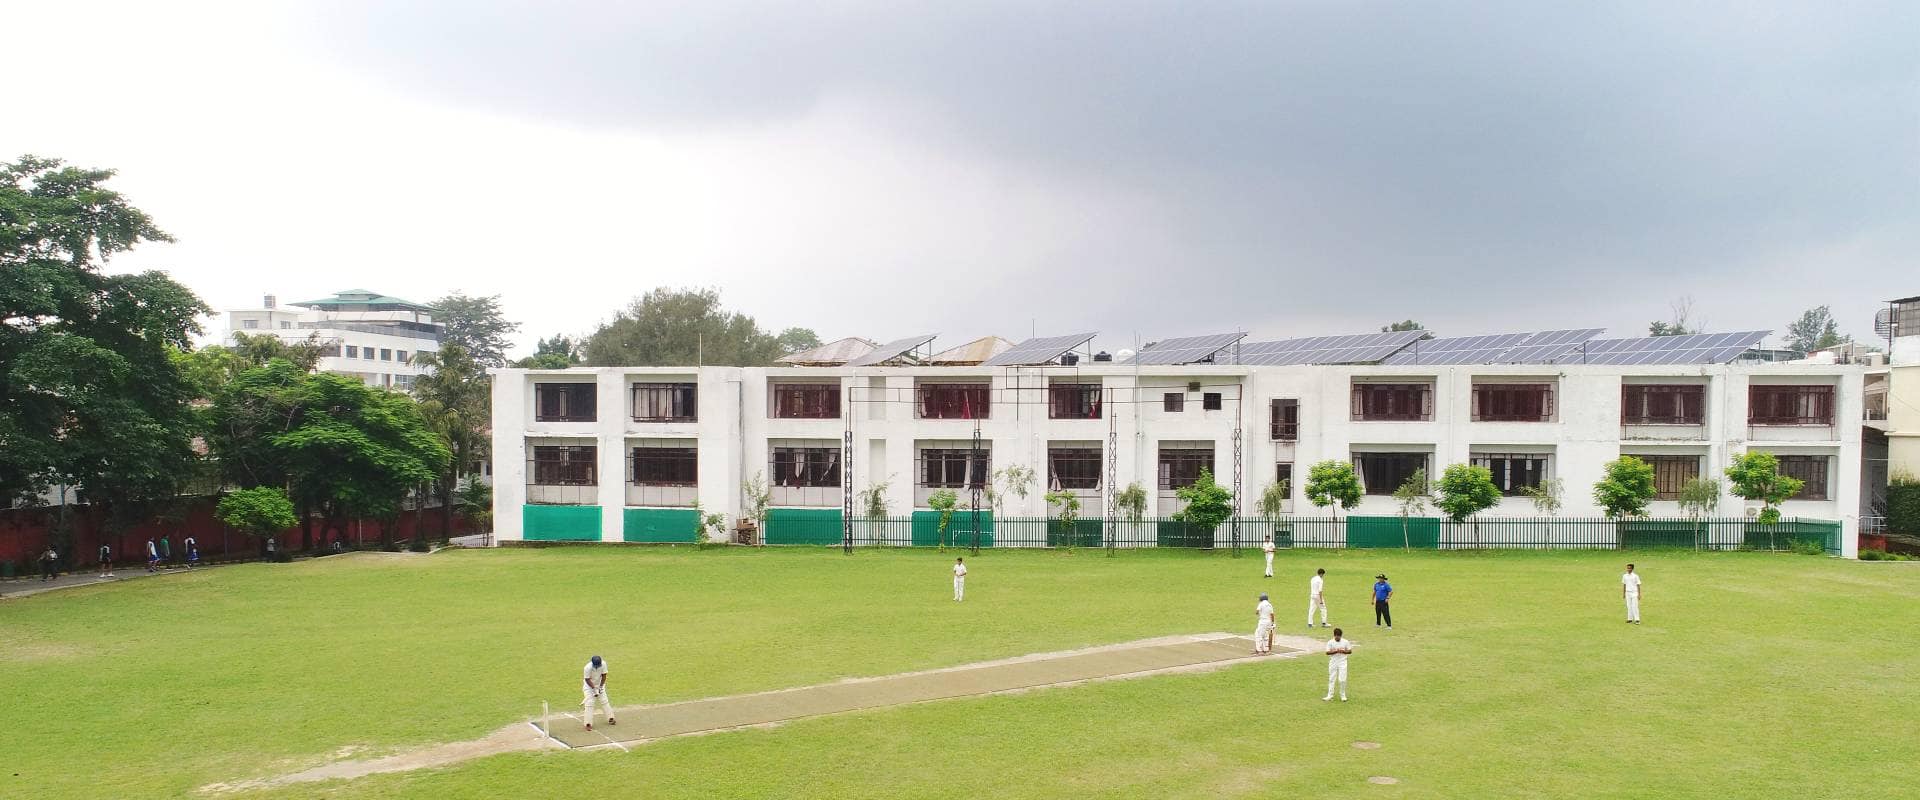 Cricket Ground With Players